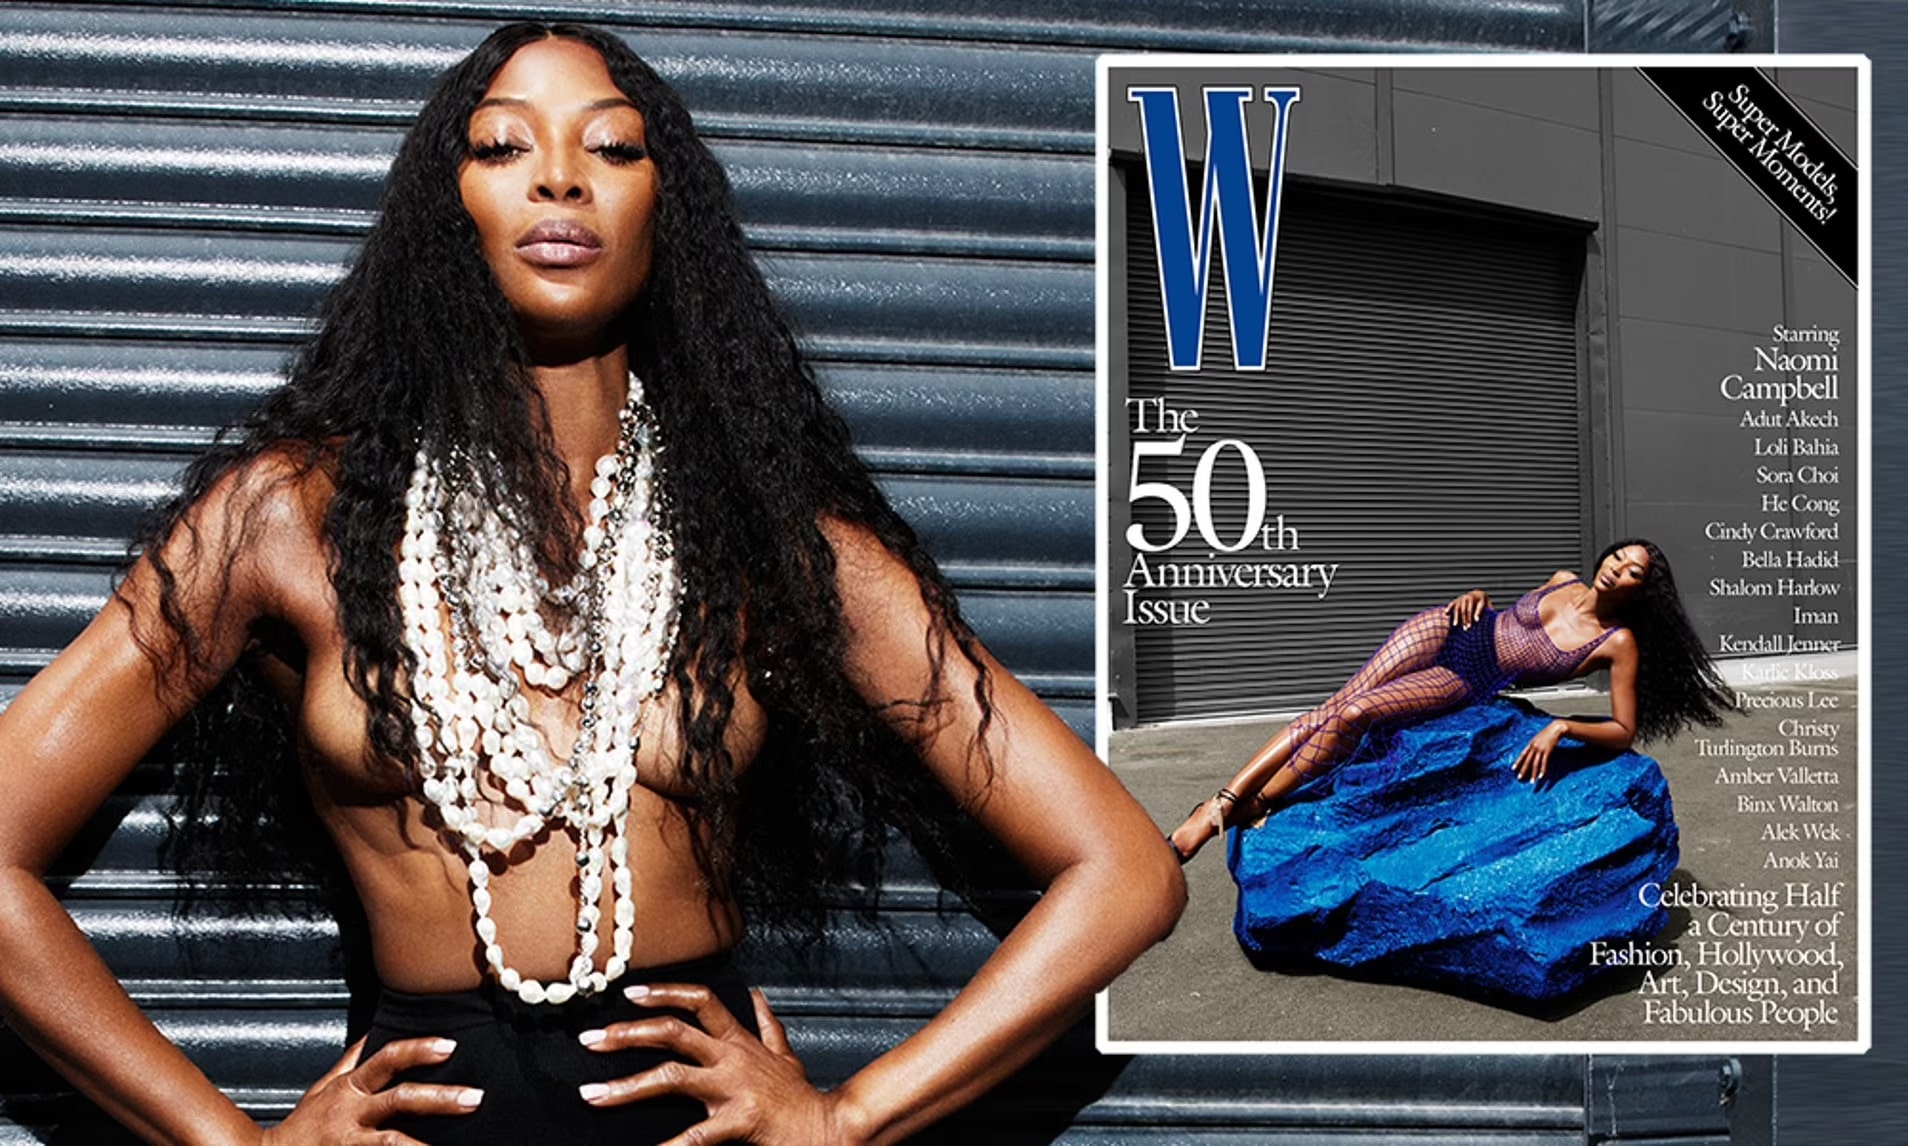 African Fashion Model: African Supermodels Iman, Adut Akech, Anok Yai, and Alek Wek Have Been Selected for W Magazine’s 50th Anniversary Issue